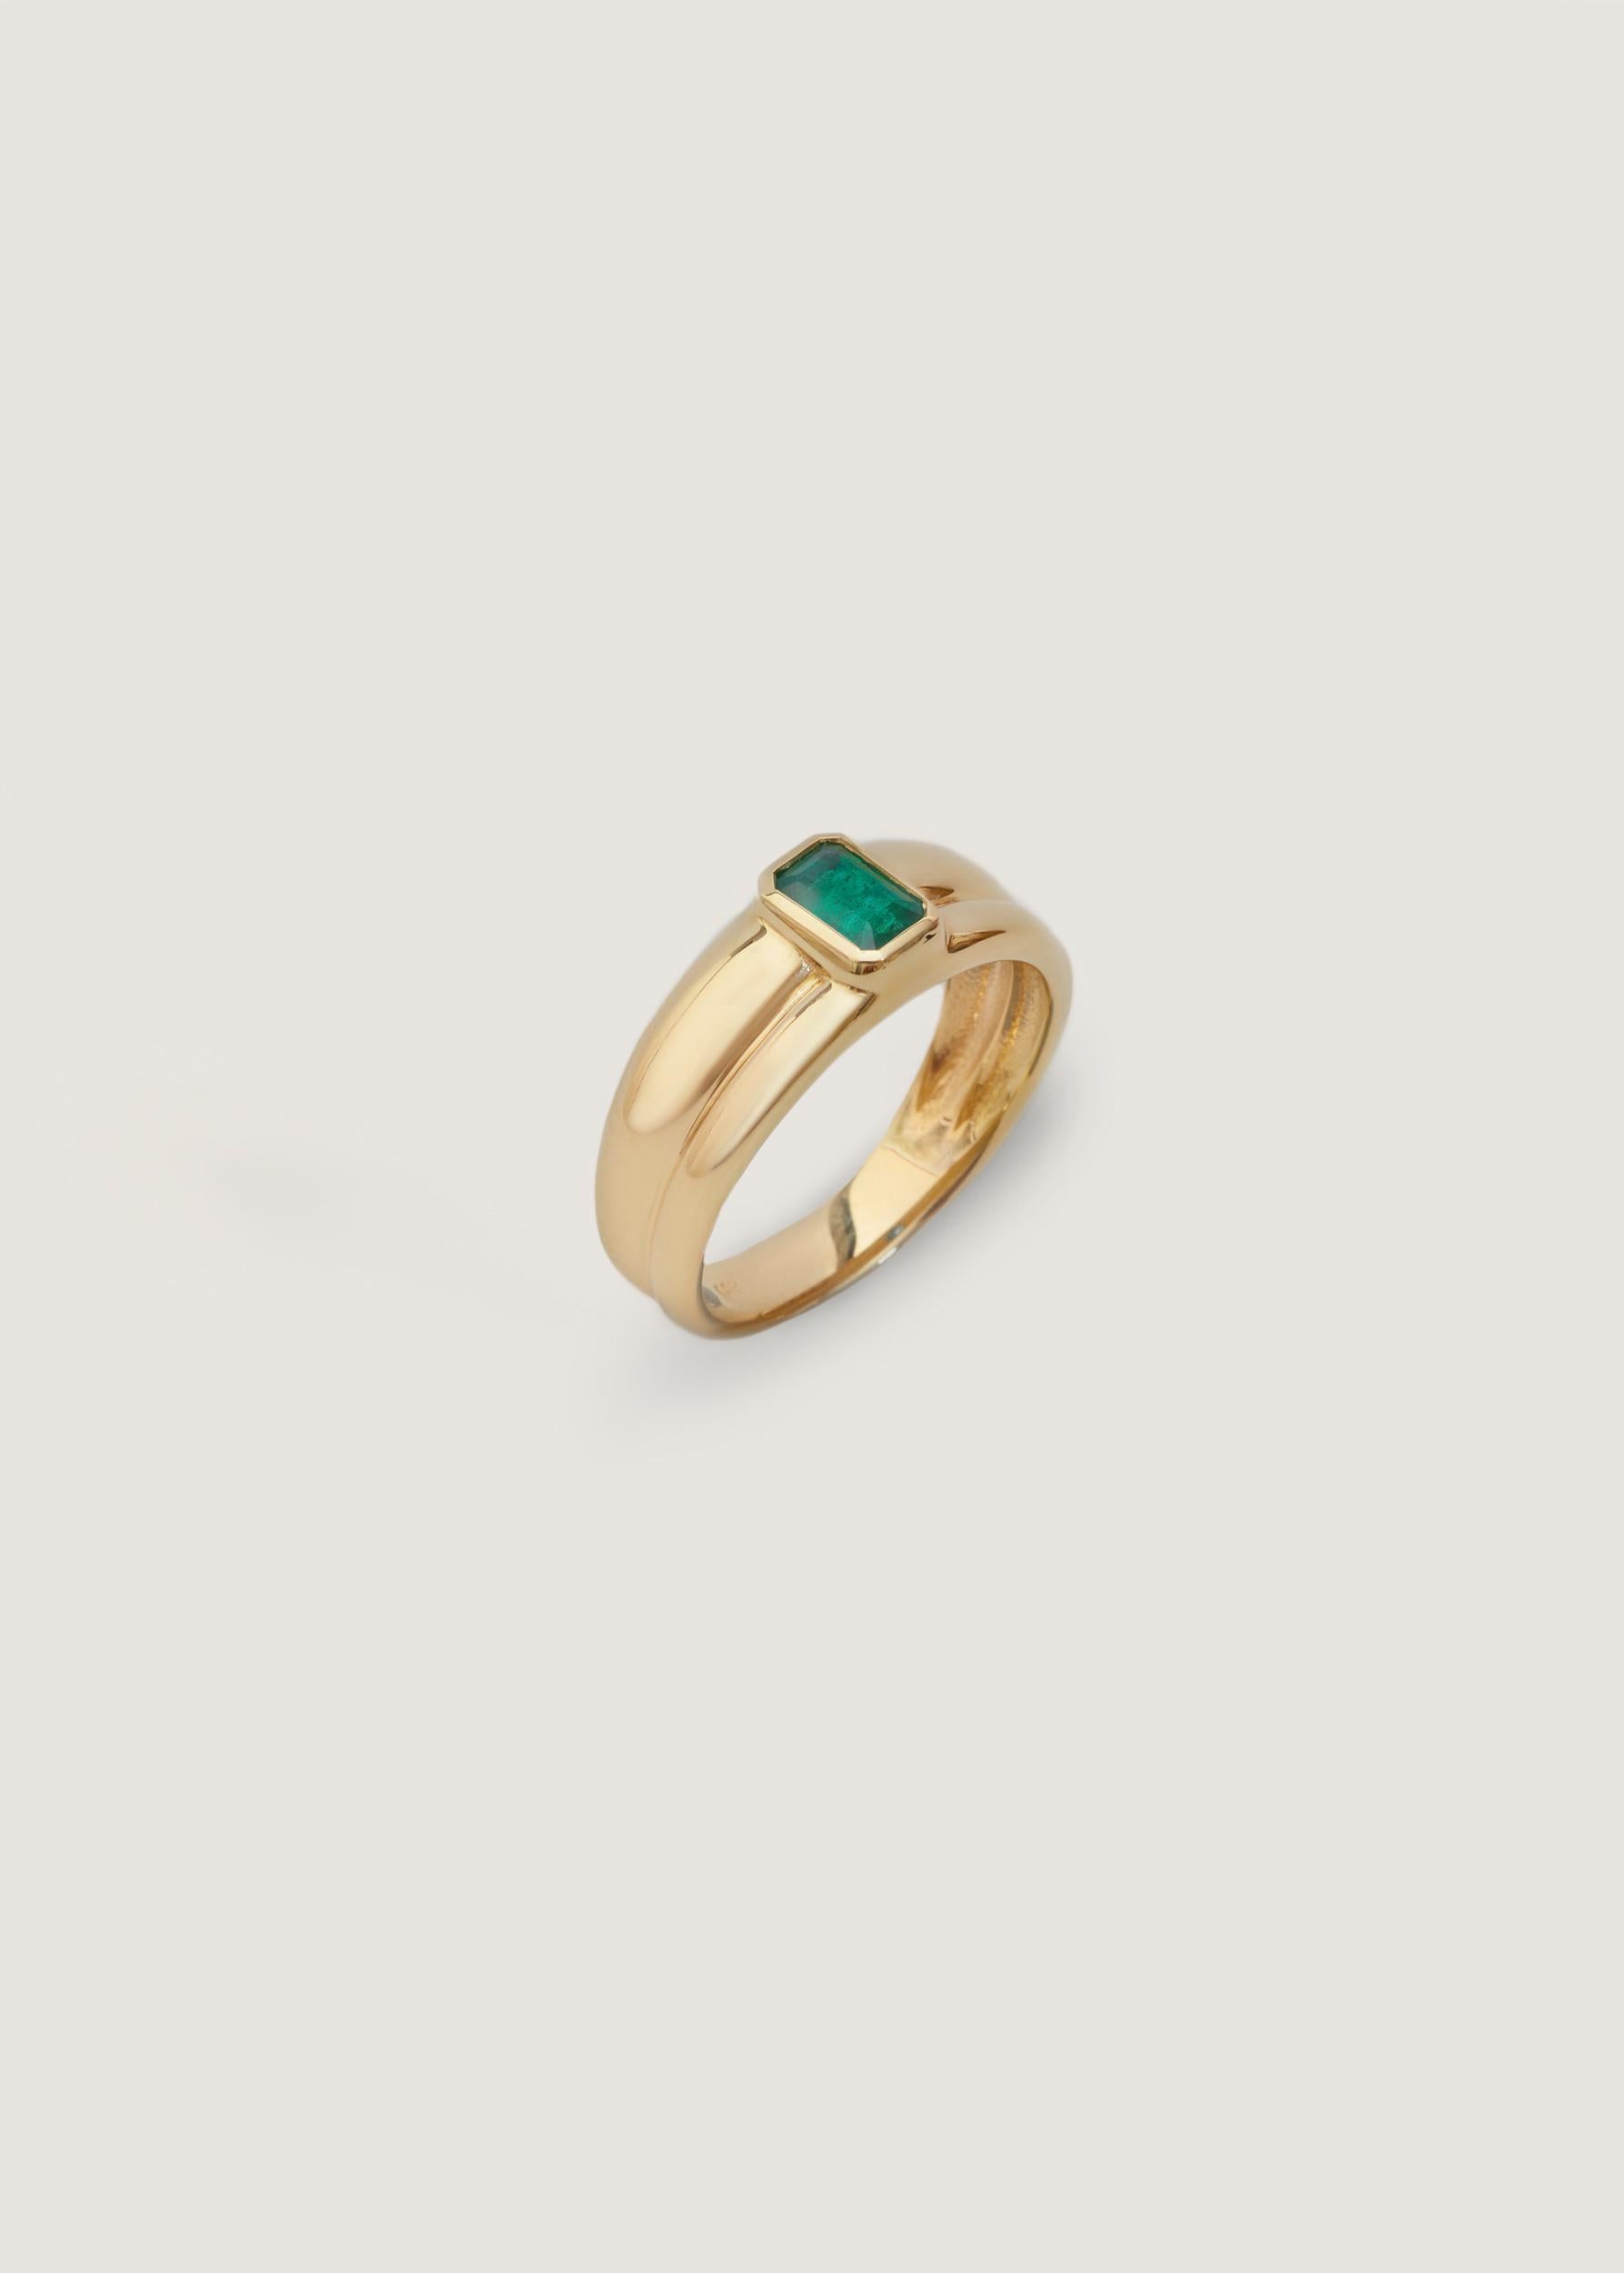 For Sale:  Françoise Stacked Ellipse Ring II - Emerald .55CW 14k Solid Yellow Gold 3